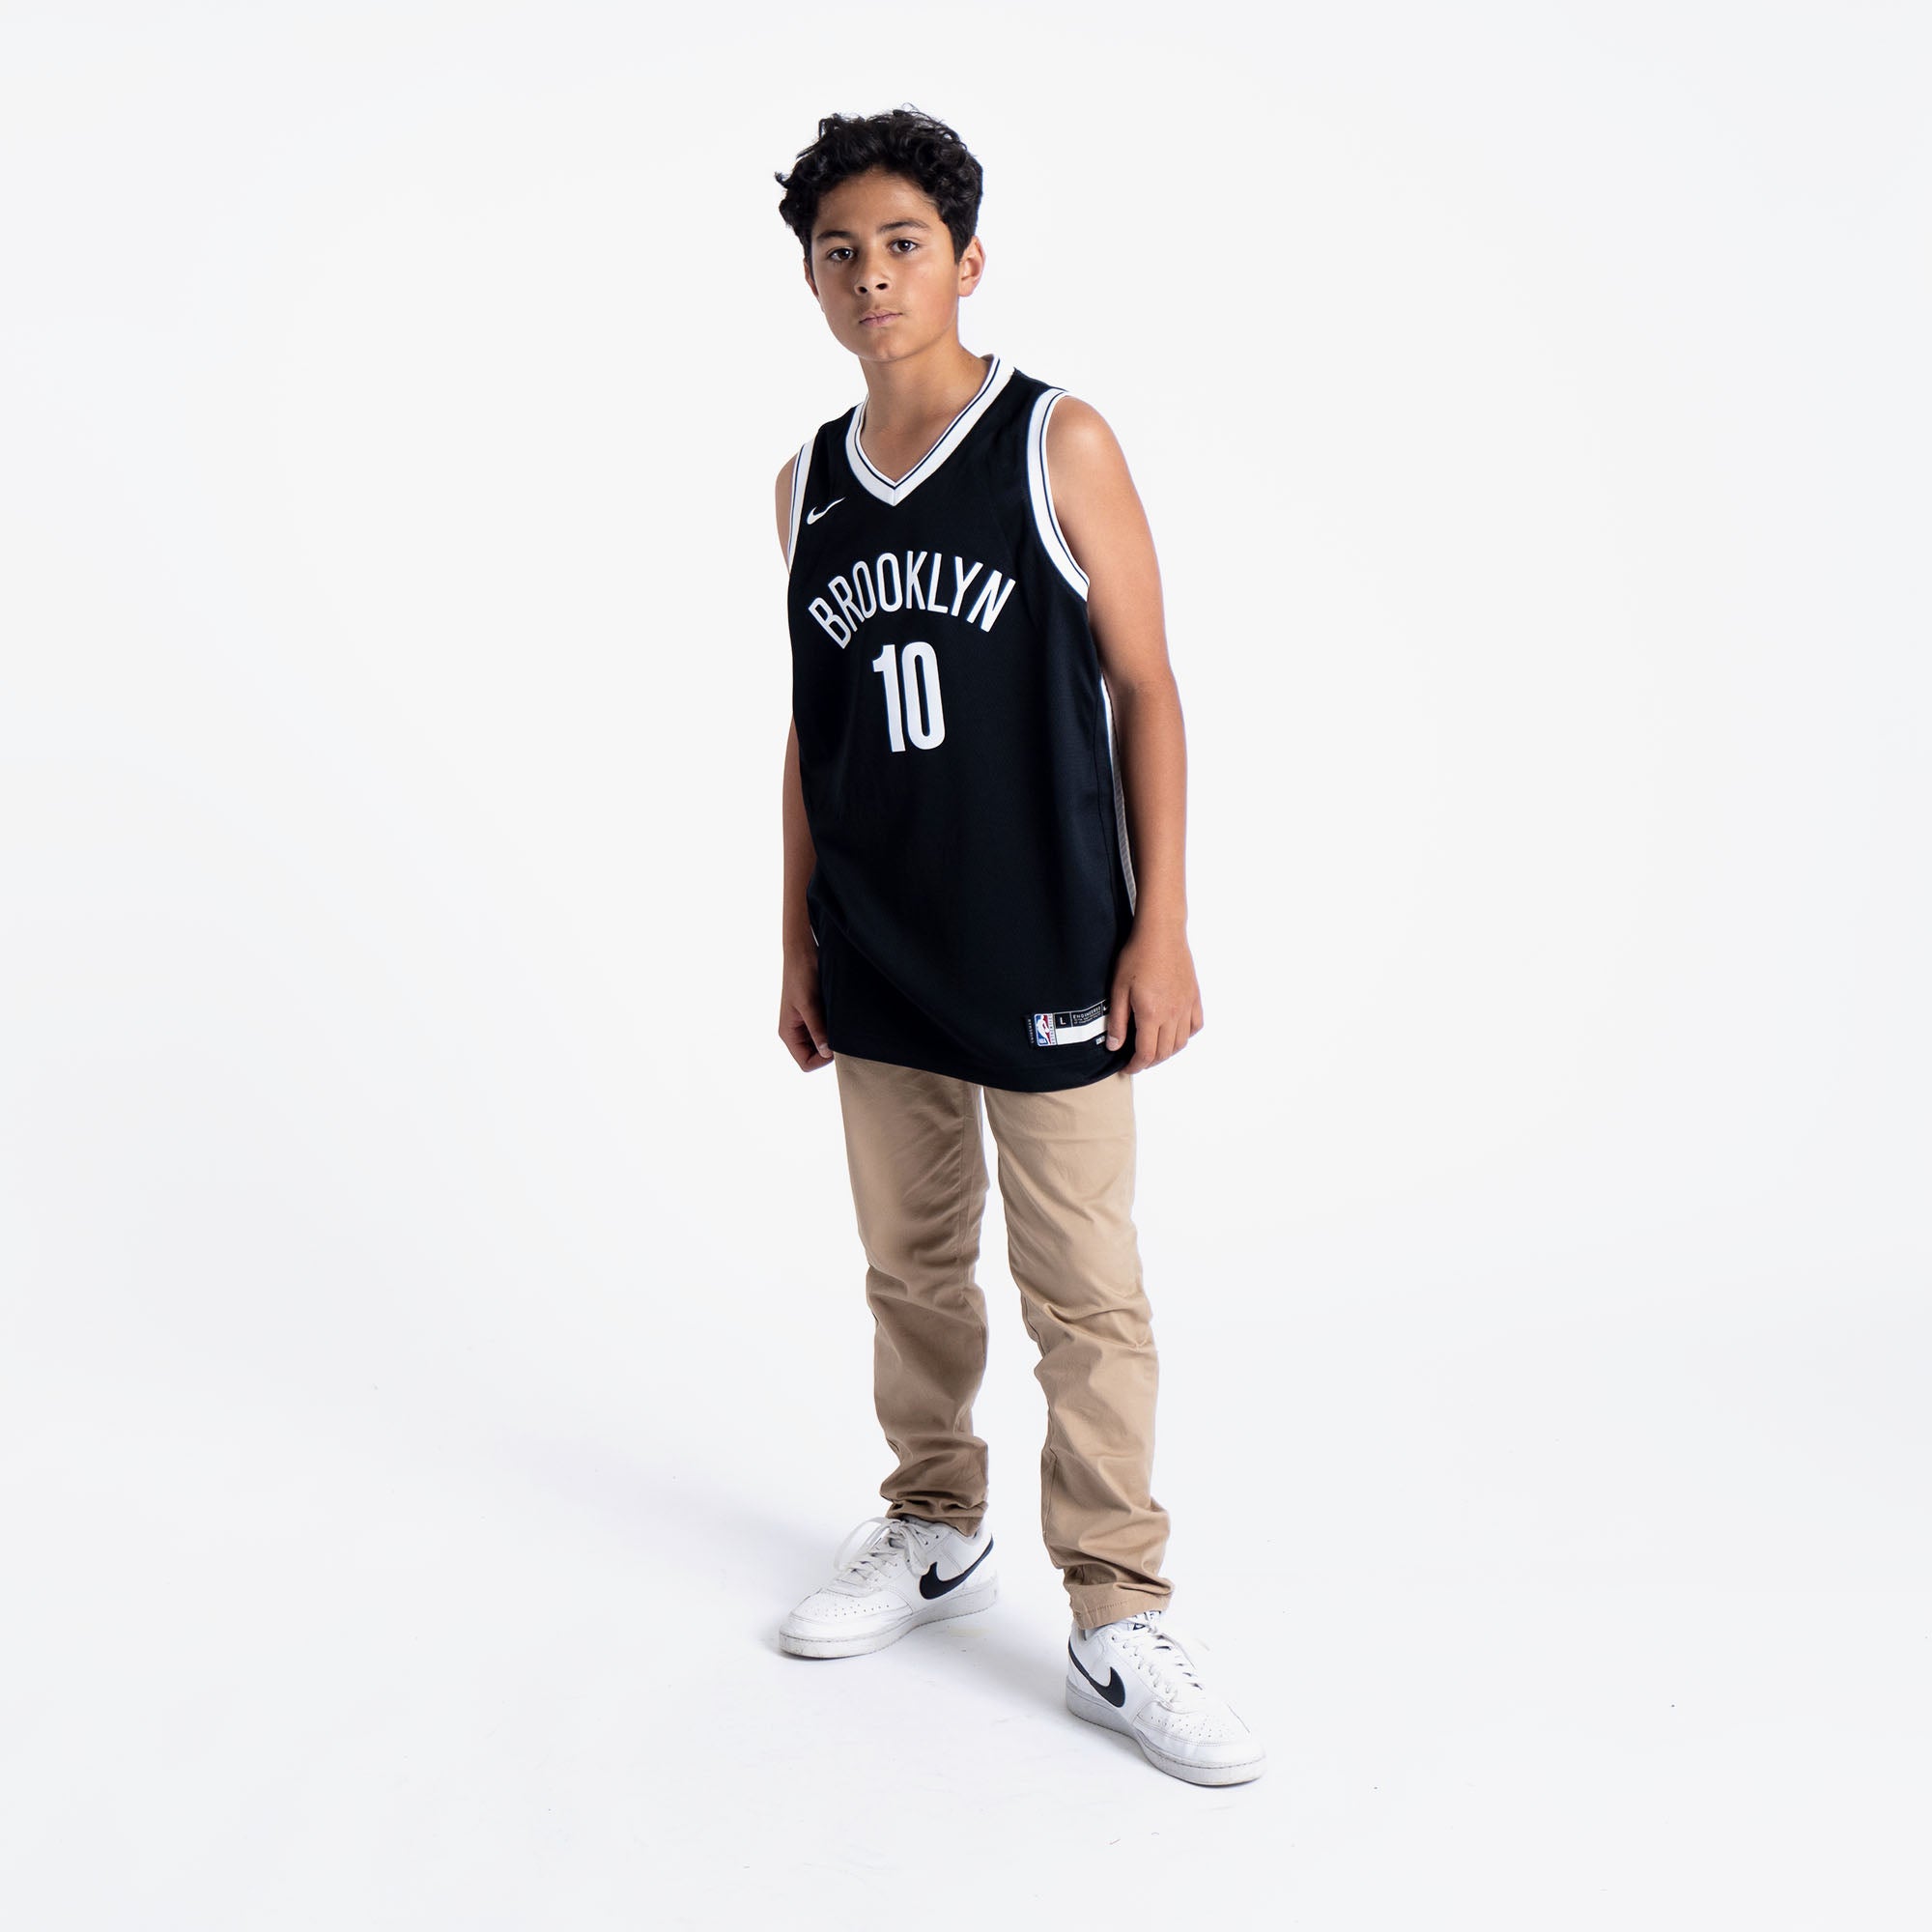 Ben Simmons Brooklyn Nets Jersey (HEAT PRESSED) – Jerseys and Sneakers